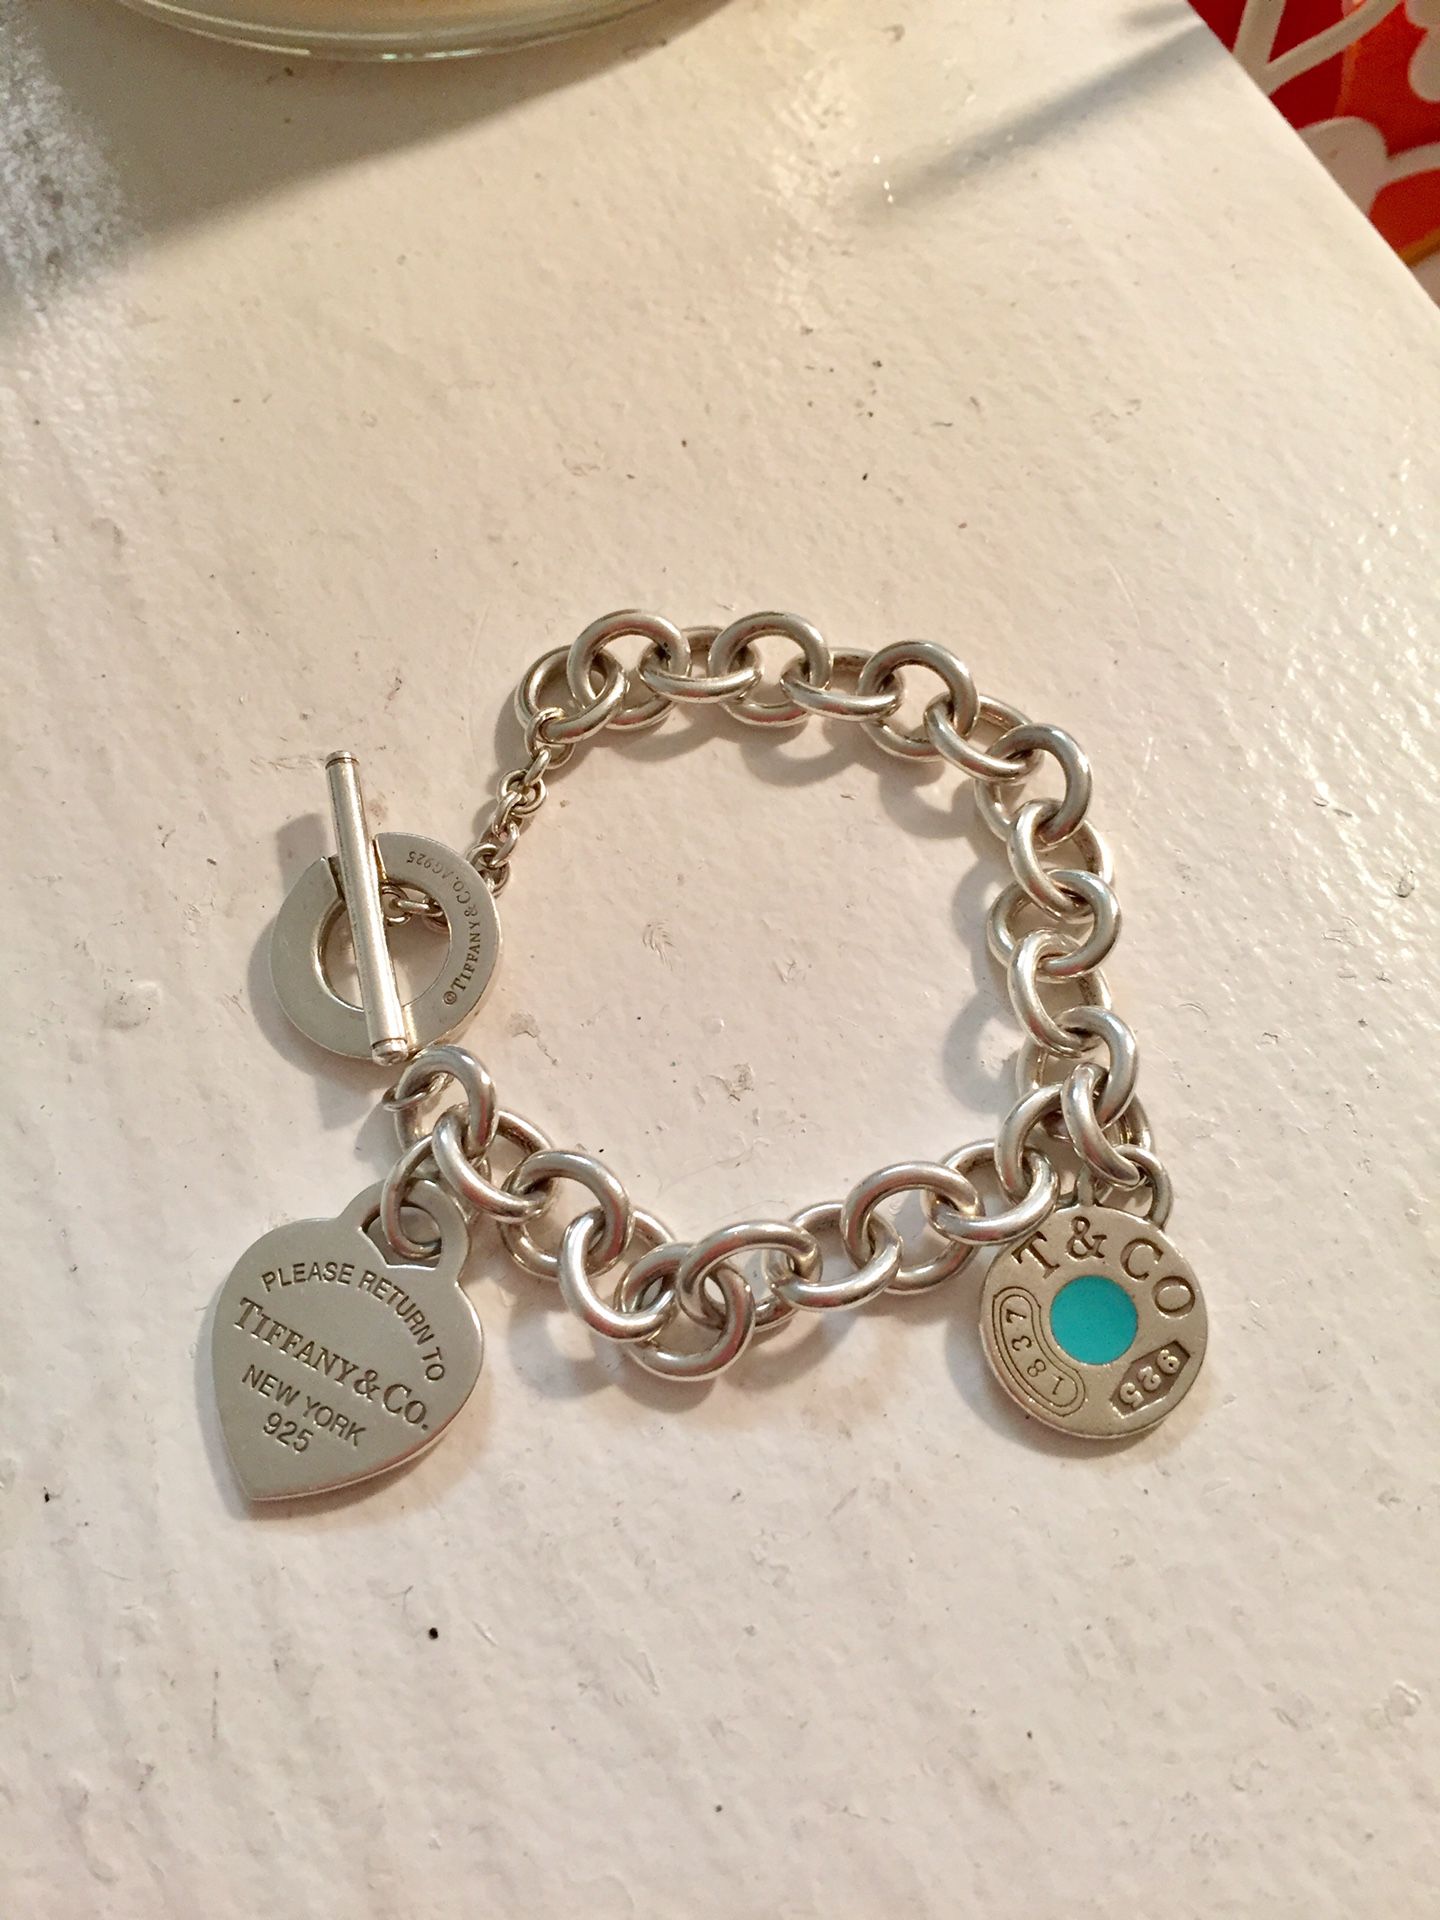 Selling Gorgeous Tiffany & Co Charm bracelet for AMAZING deal!!!